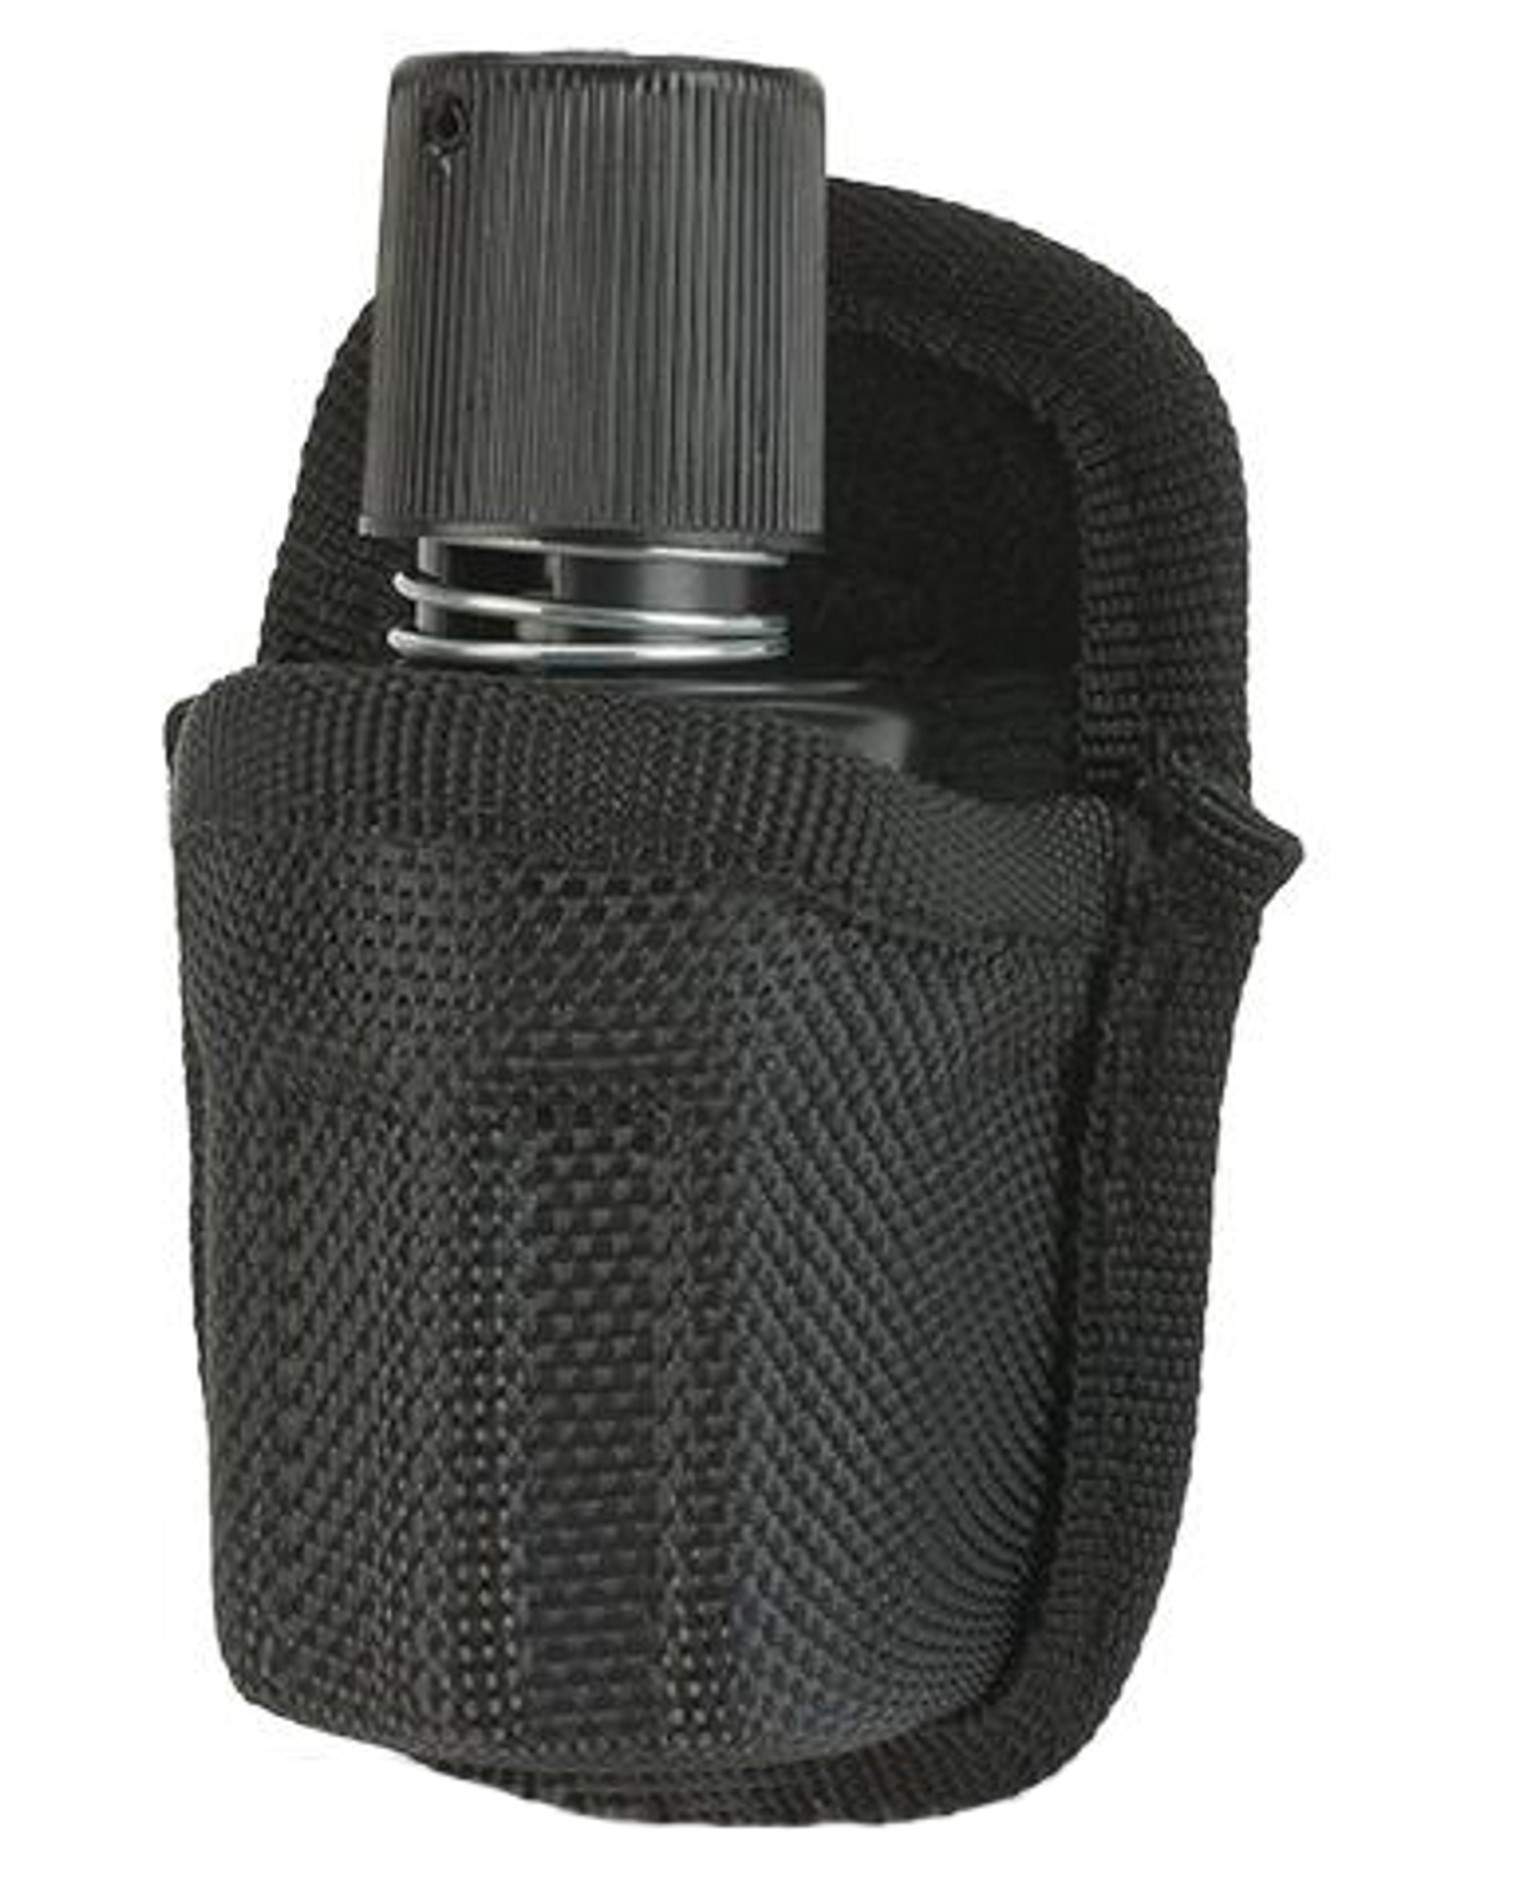 ASG Dan Wesson Tactical Revolver Speedloader Pouch - Black